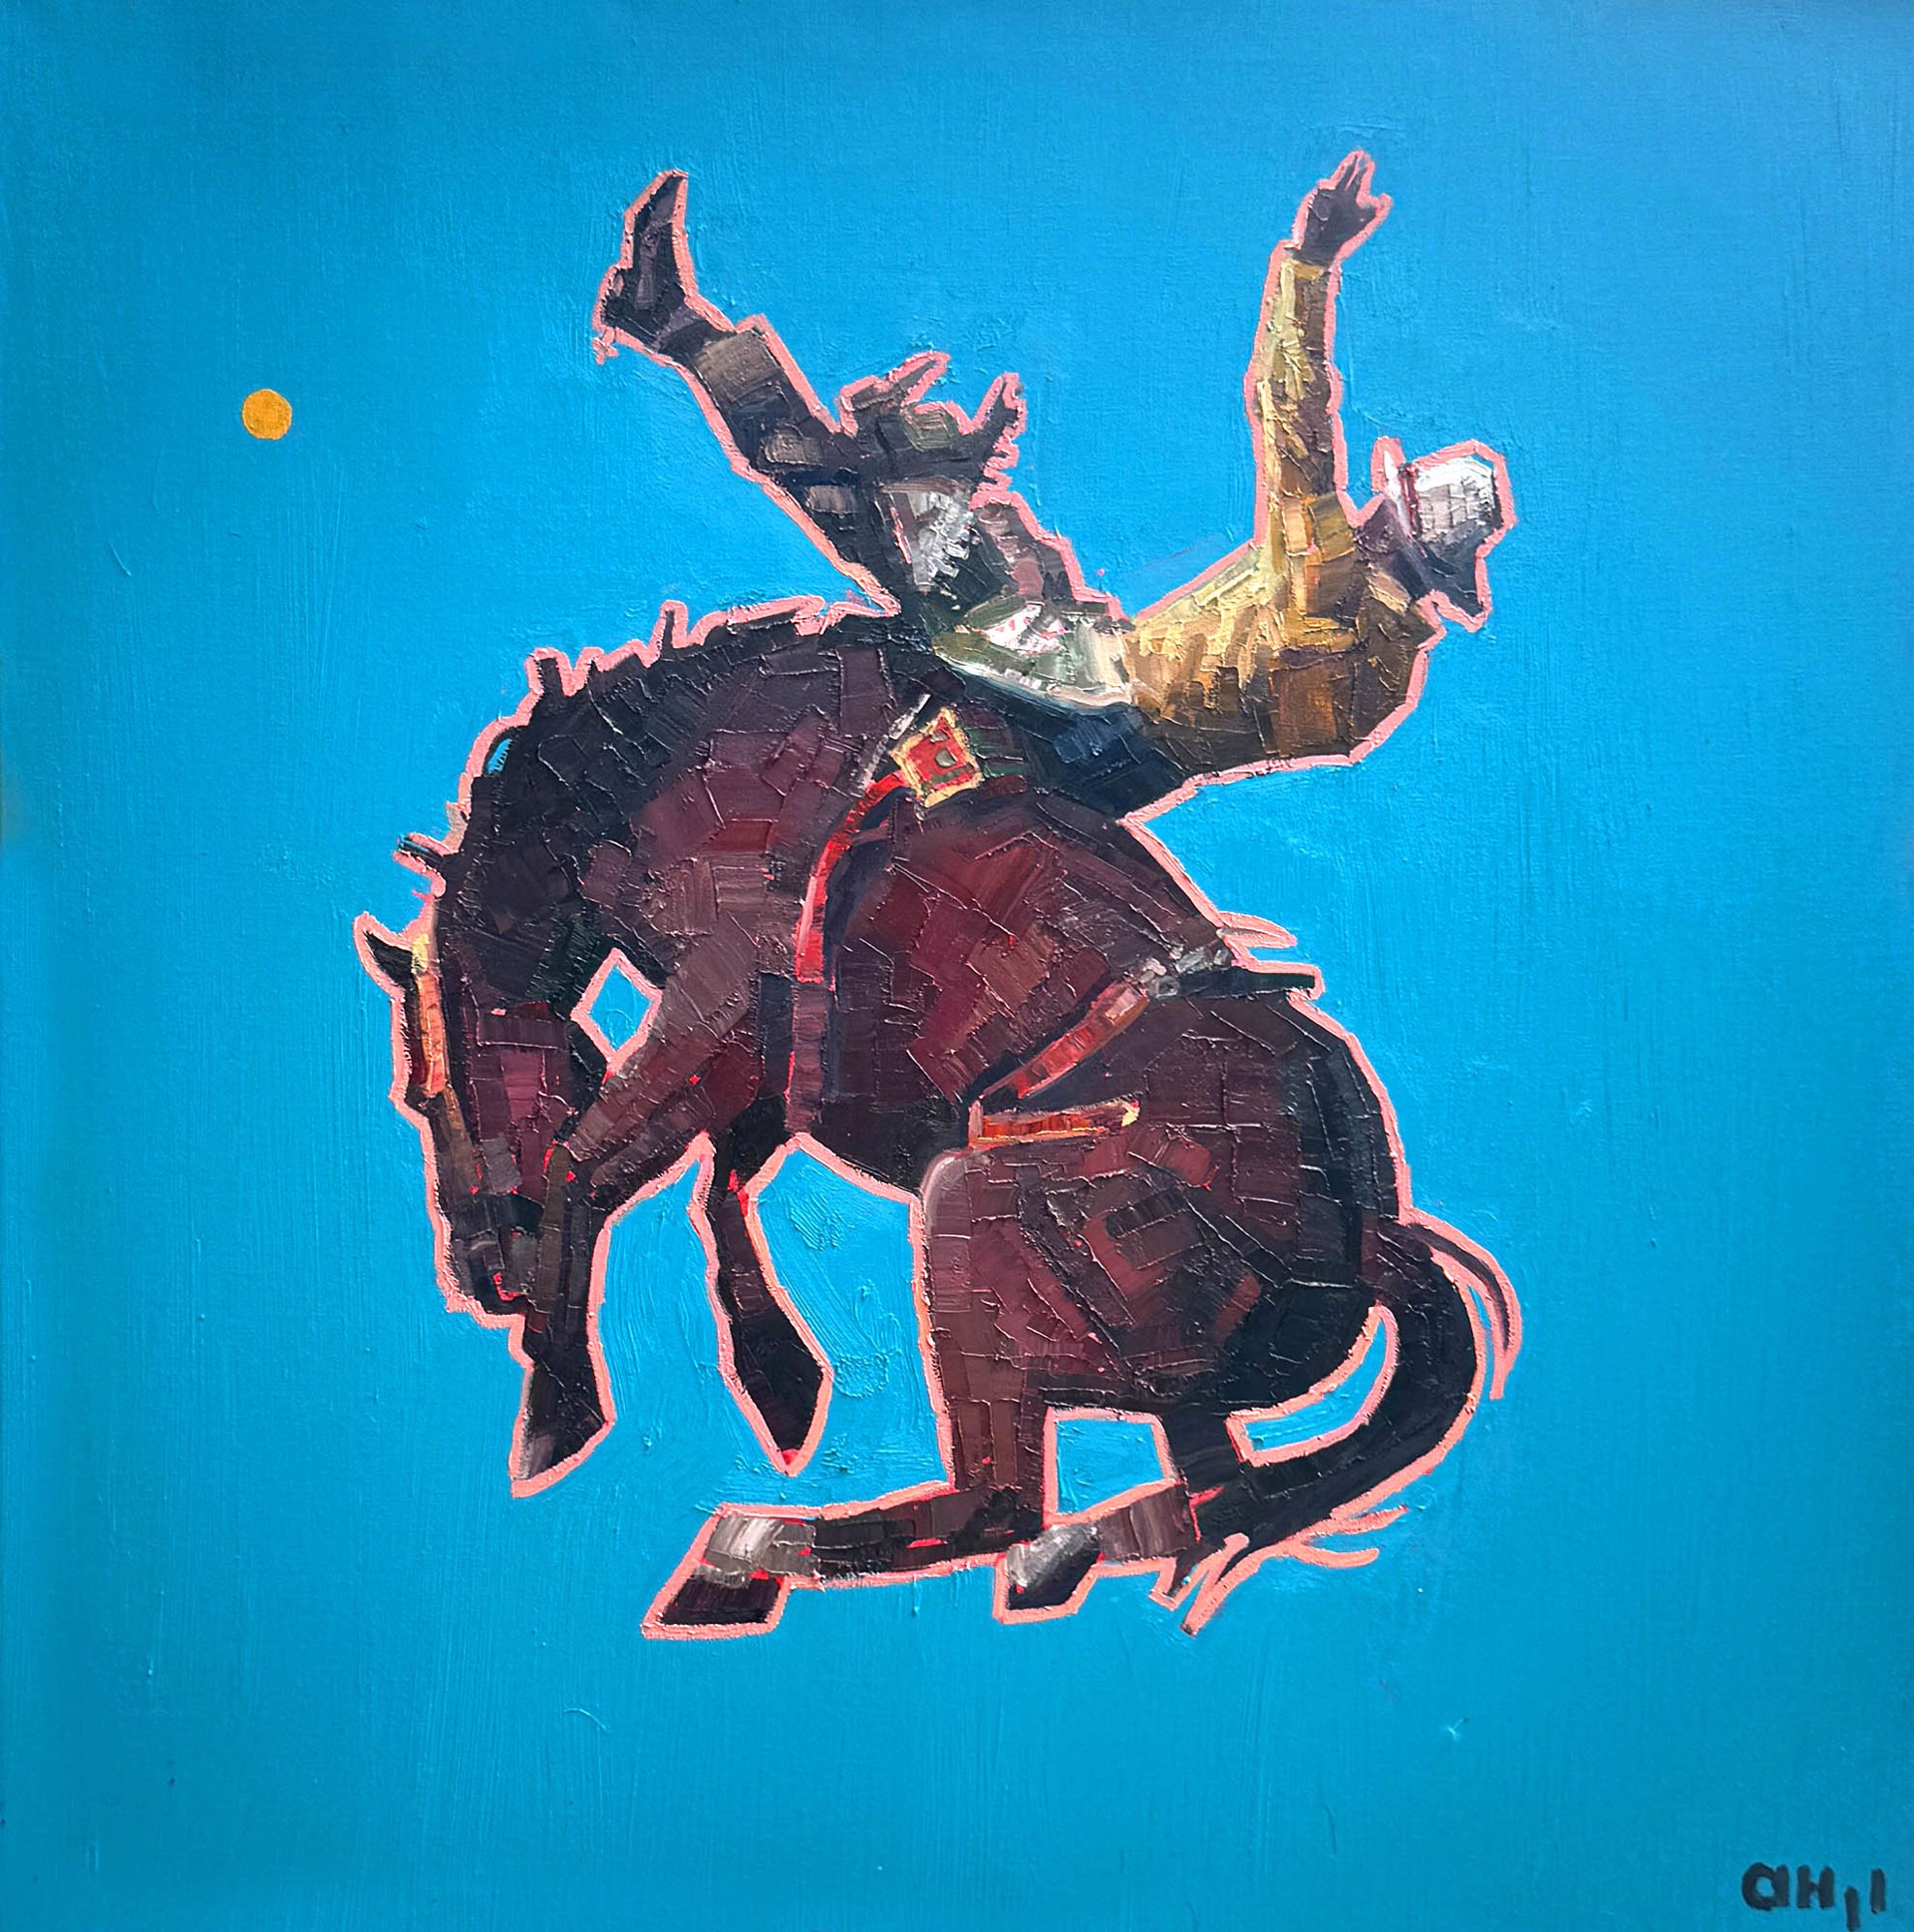 Original Oil on Canvas Painting By Aaron Hazel Featuring A Rider On A Bucking Bronco